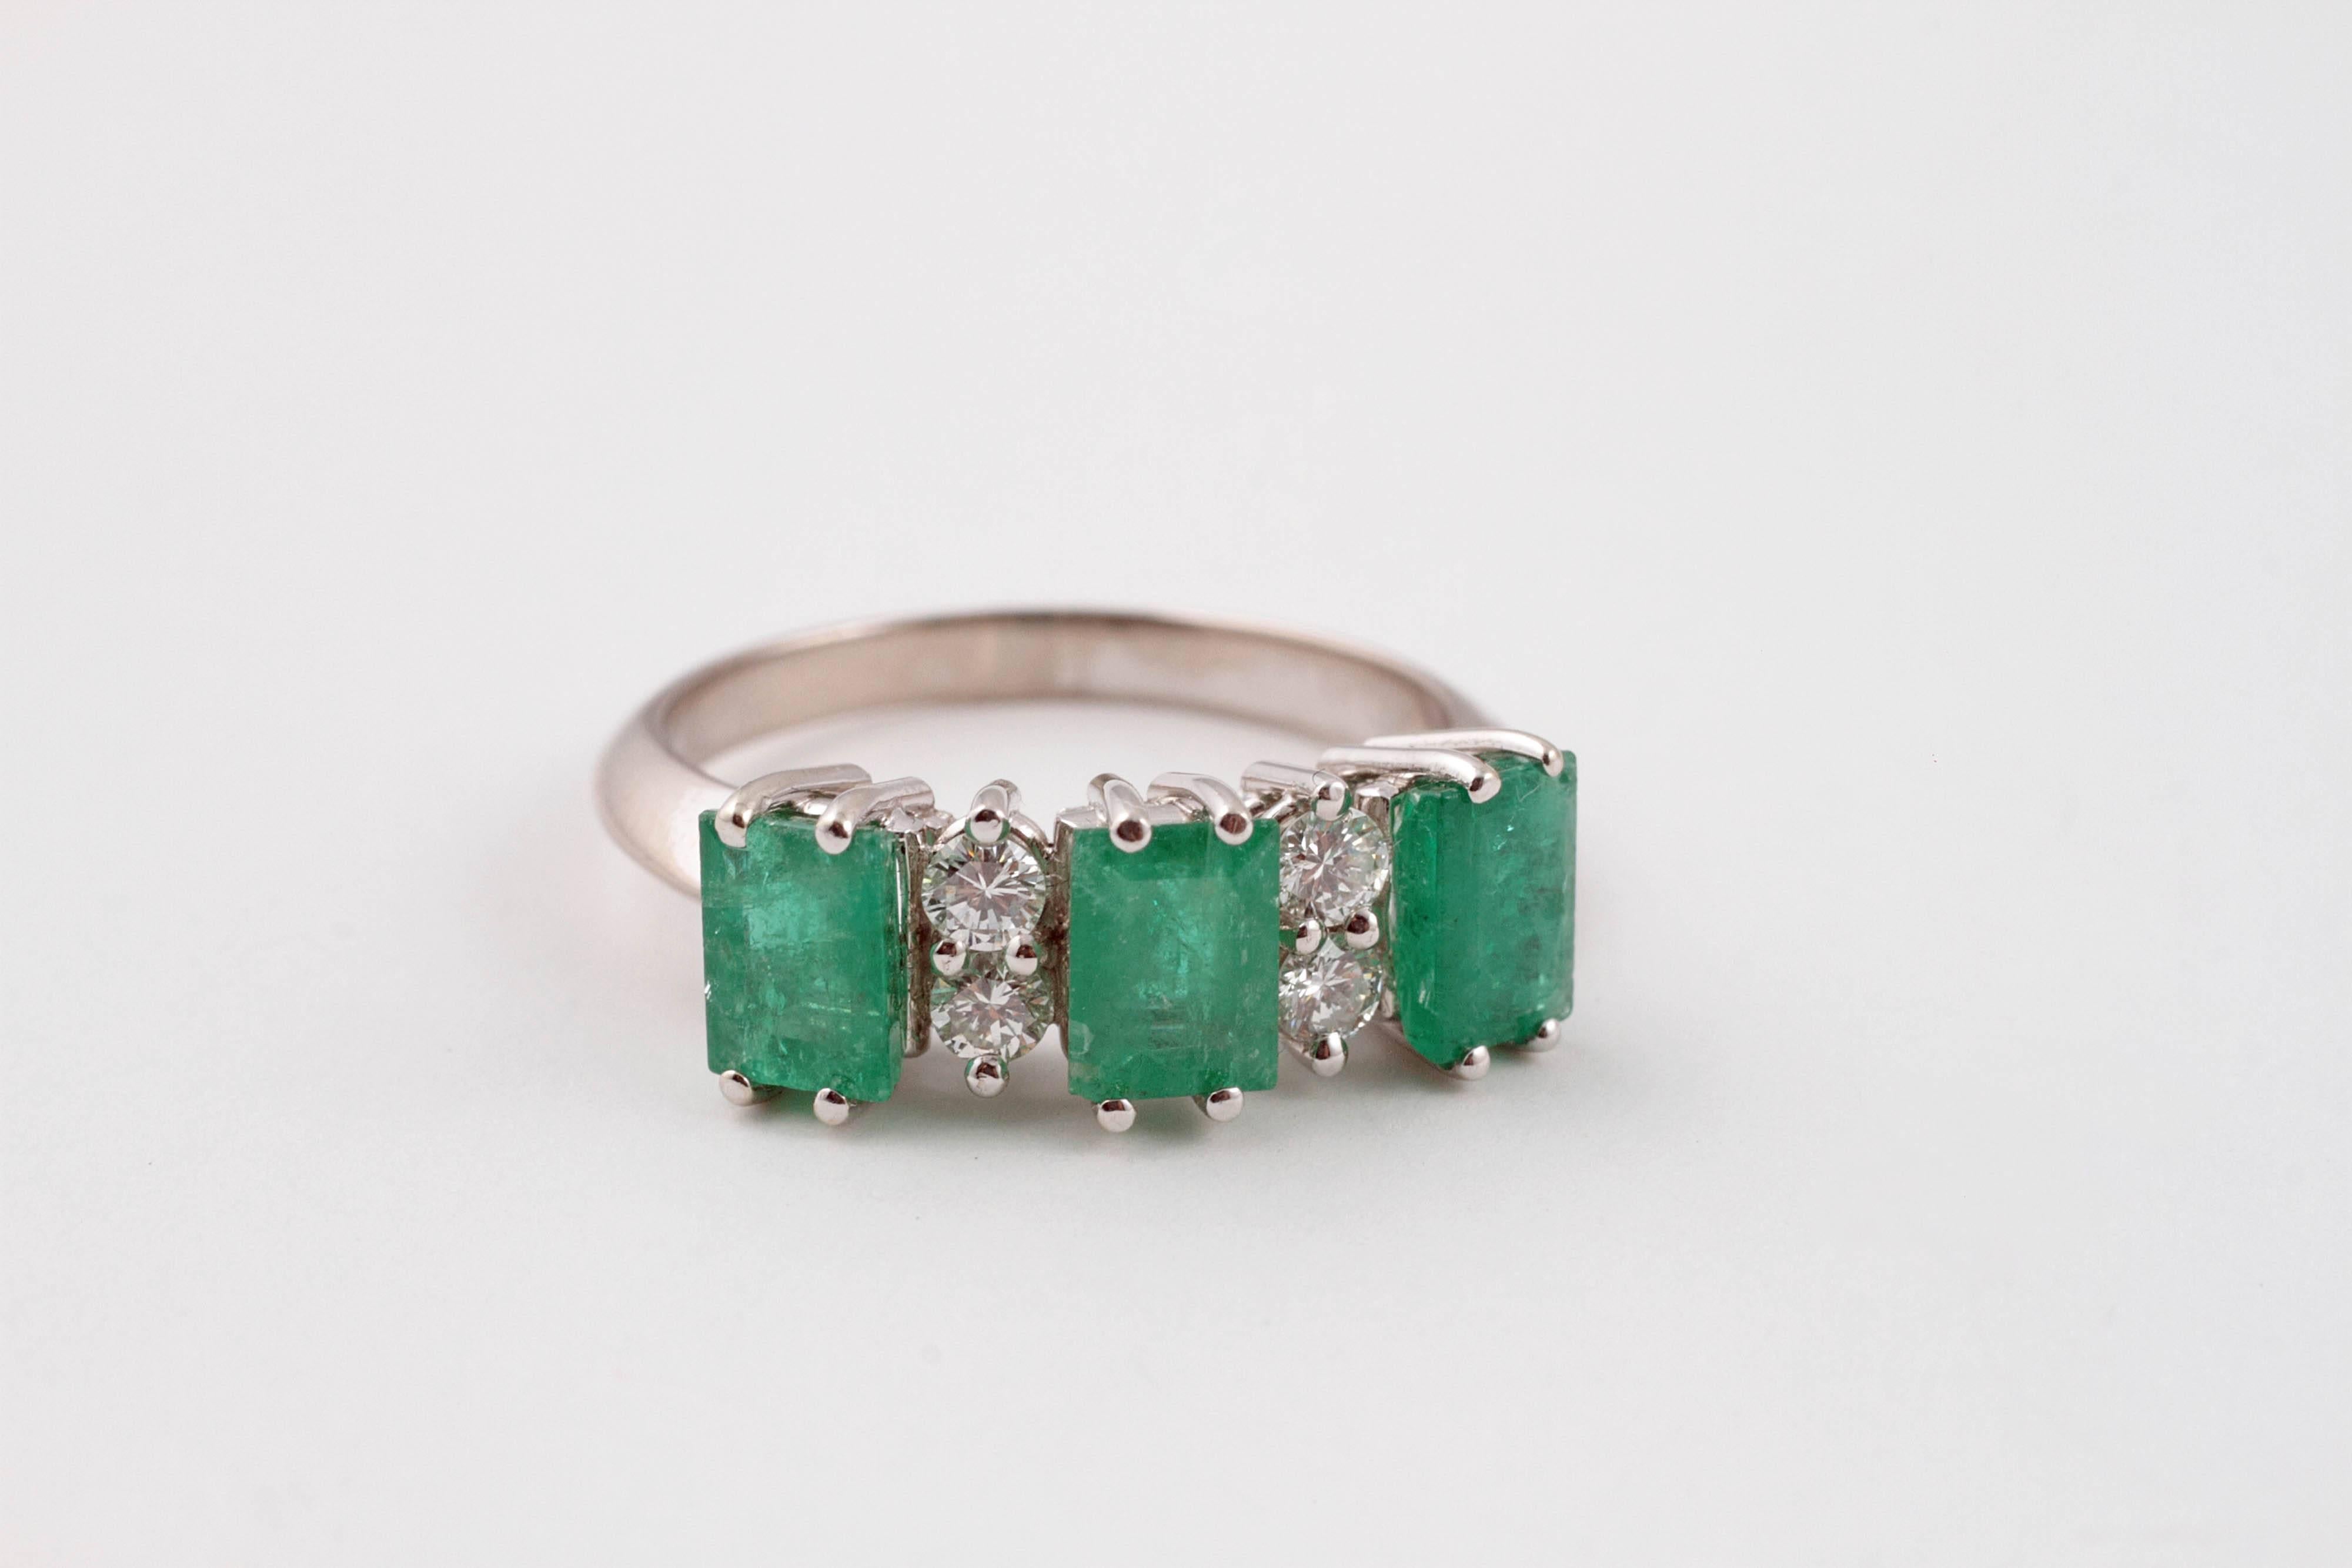 Vibrant 1.50 carats of emeralds accented with .20 carats of diamonds set in 18 karat white gold.  Size 7.25.